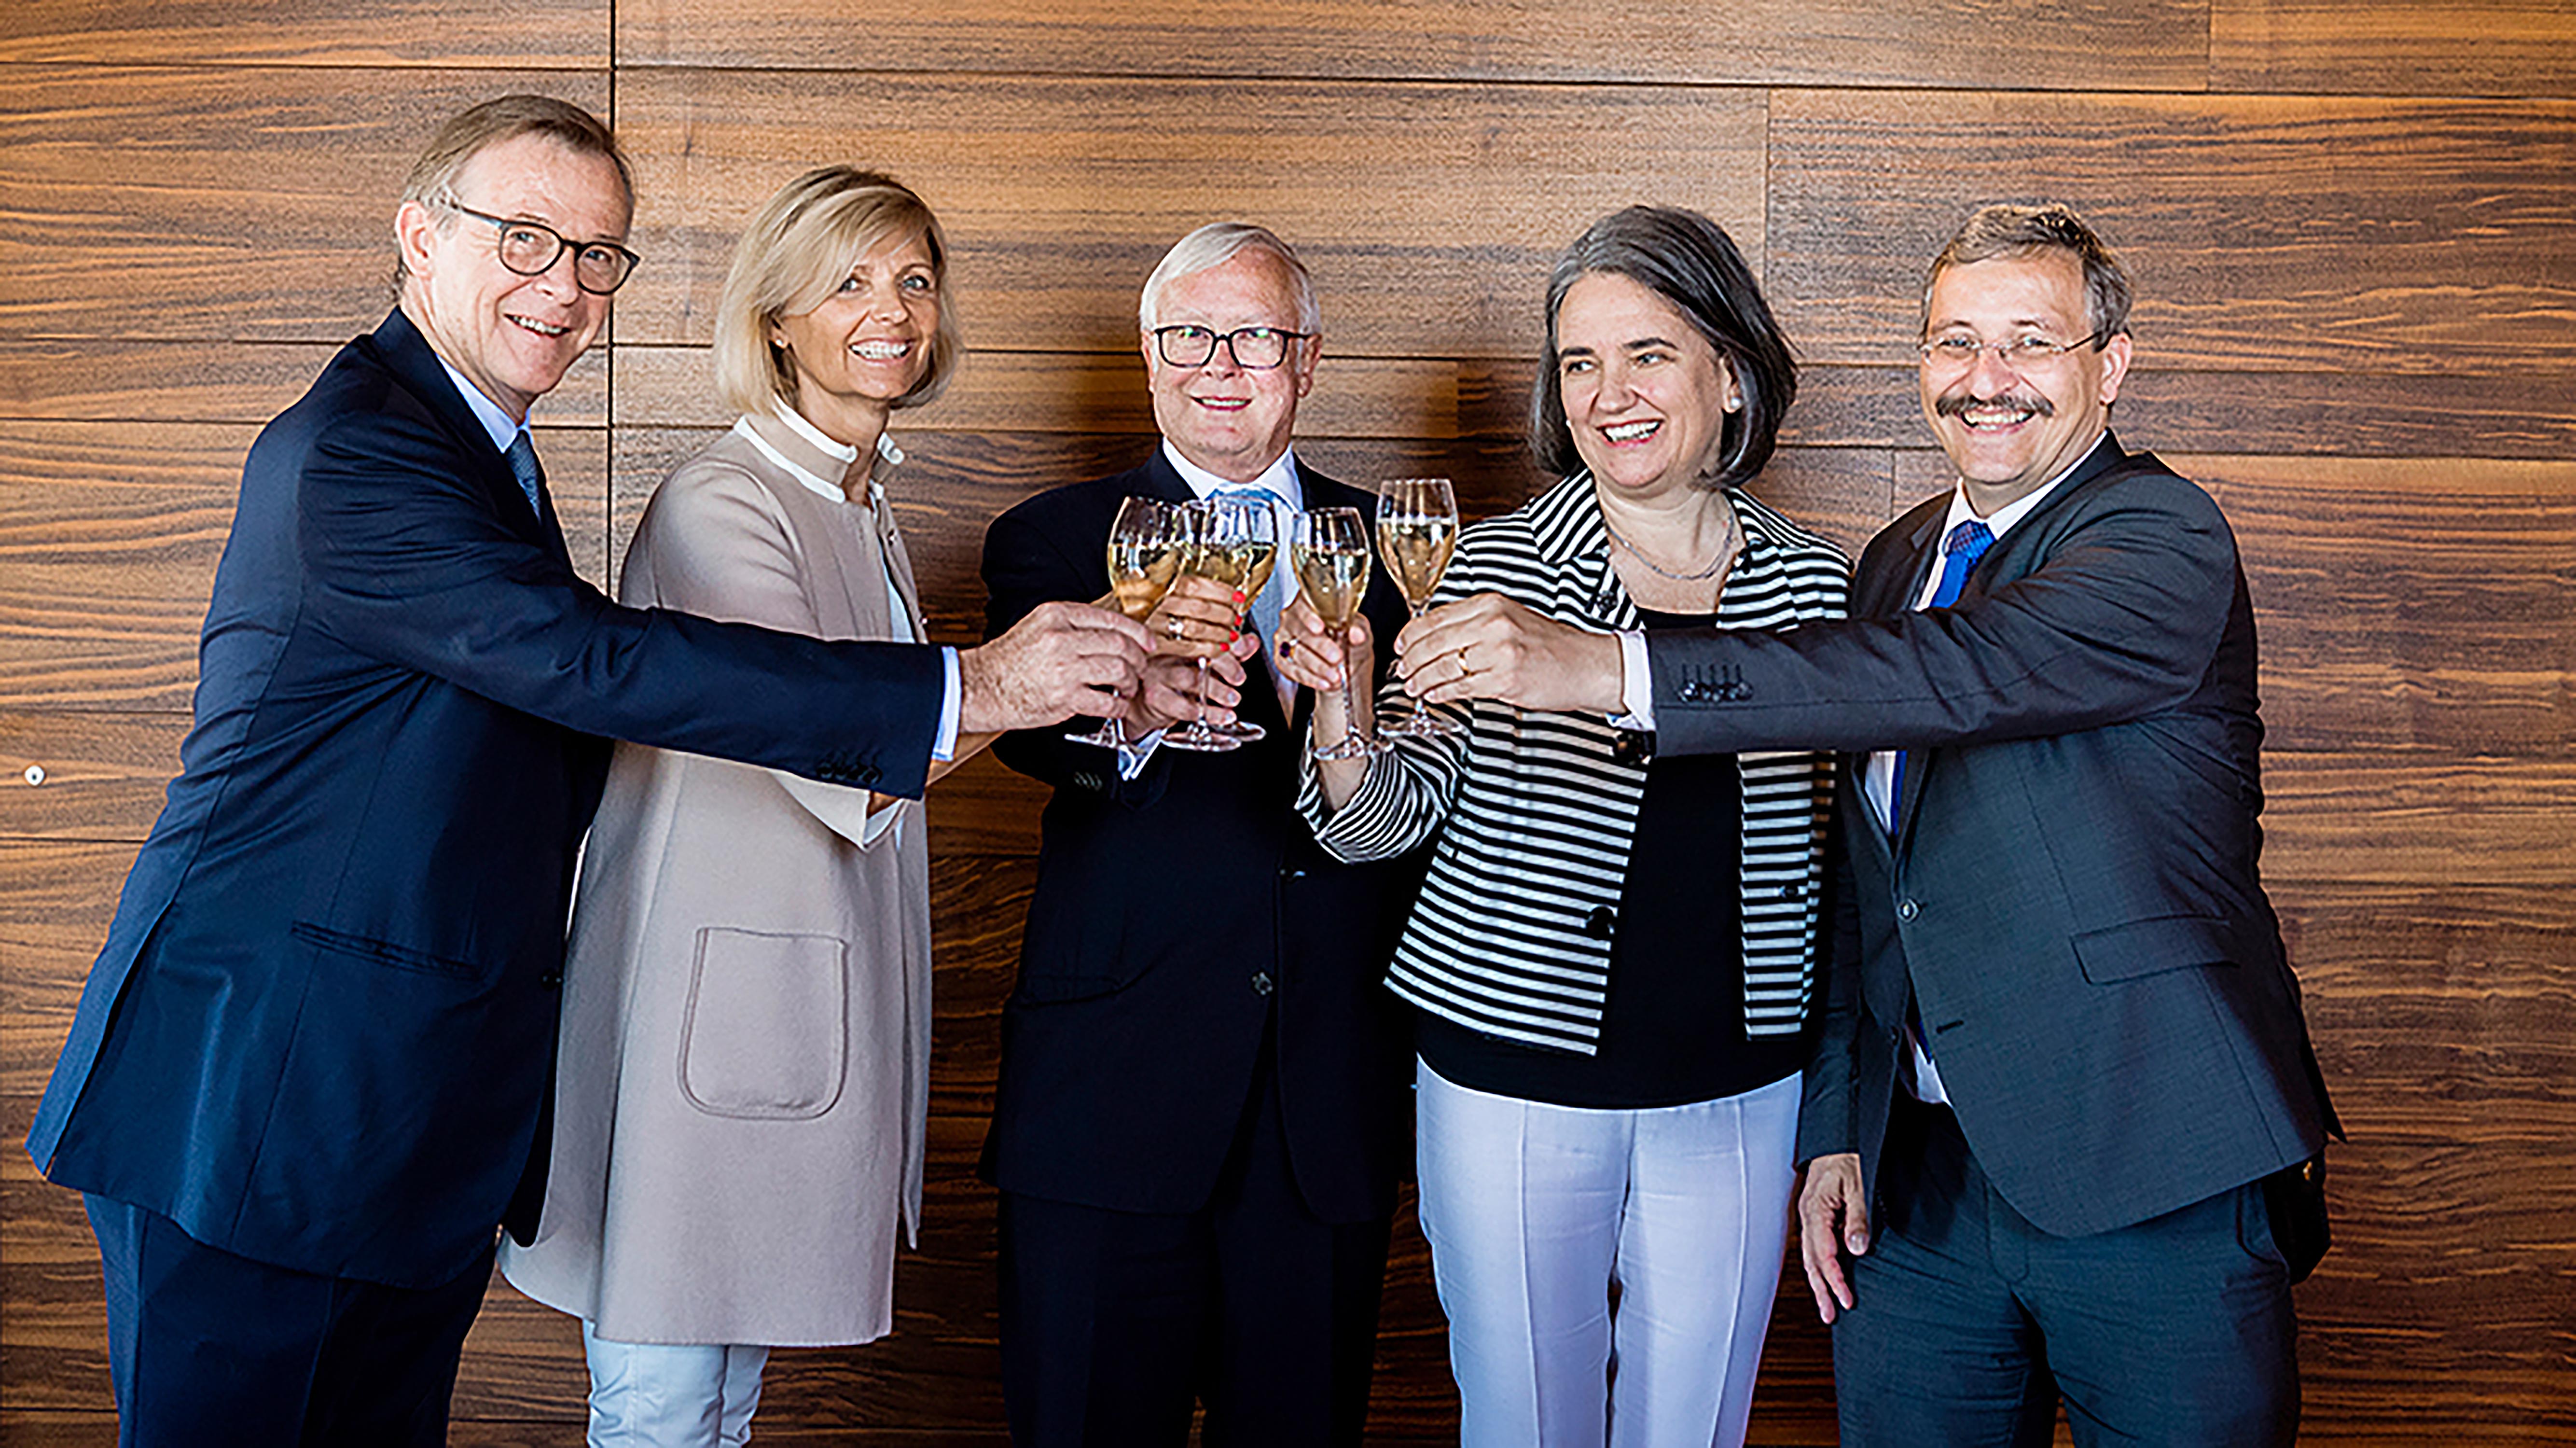 Drinking to a shared future: In May 2017, the Alumni Association of the University of Zurich ZUNIV and Alumni UZH merged to form the umbrella organization UZH Alumni. Pictured: Alain Gloor (then vice-president of ZUNIV, currently on the board of UZH Alumni), Sandra Emanuel (general manager of UZH Alumni), Peter Isler (president of UZH Alumni), Denise Schmid (then president of ZUNIV and until 2018 co-president of UZH Alumni).